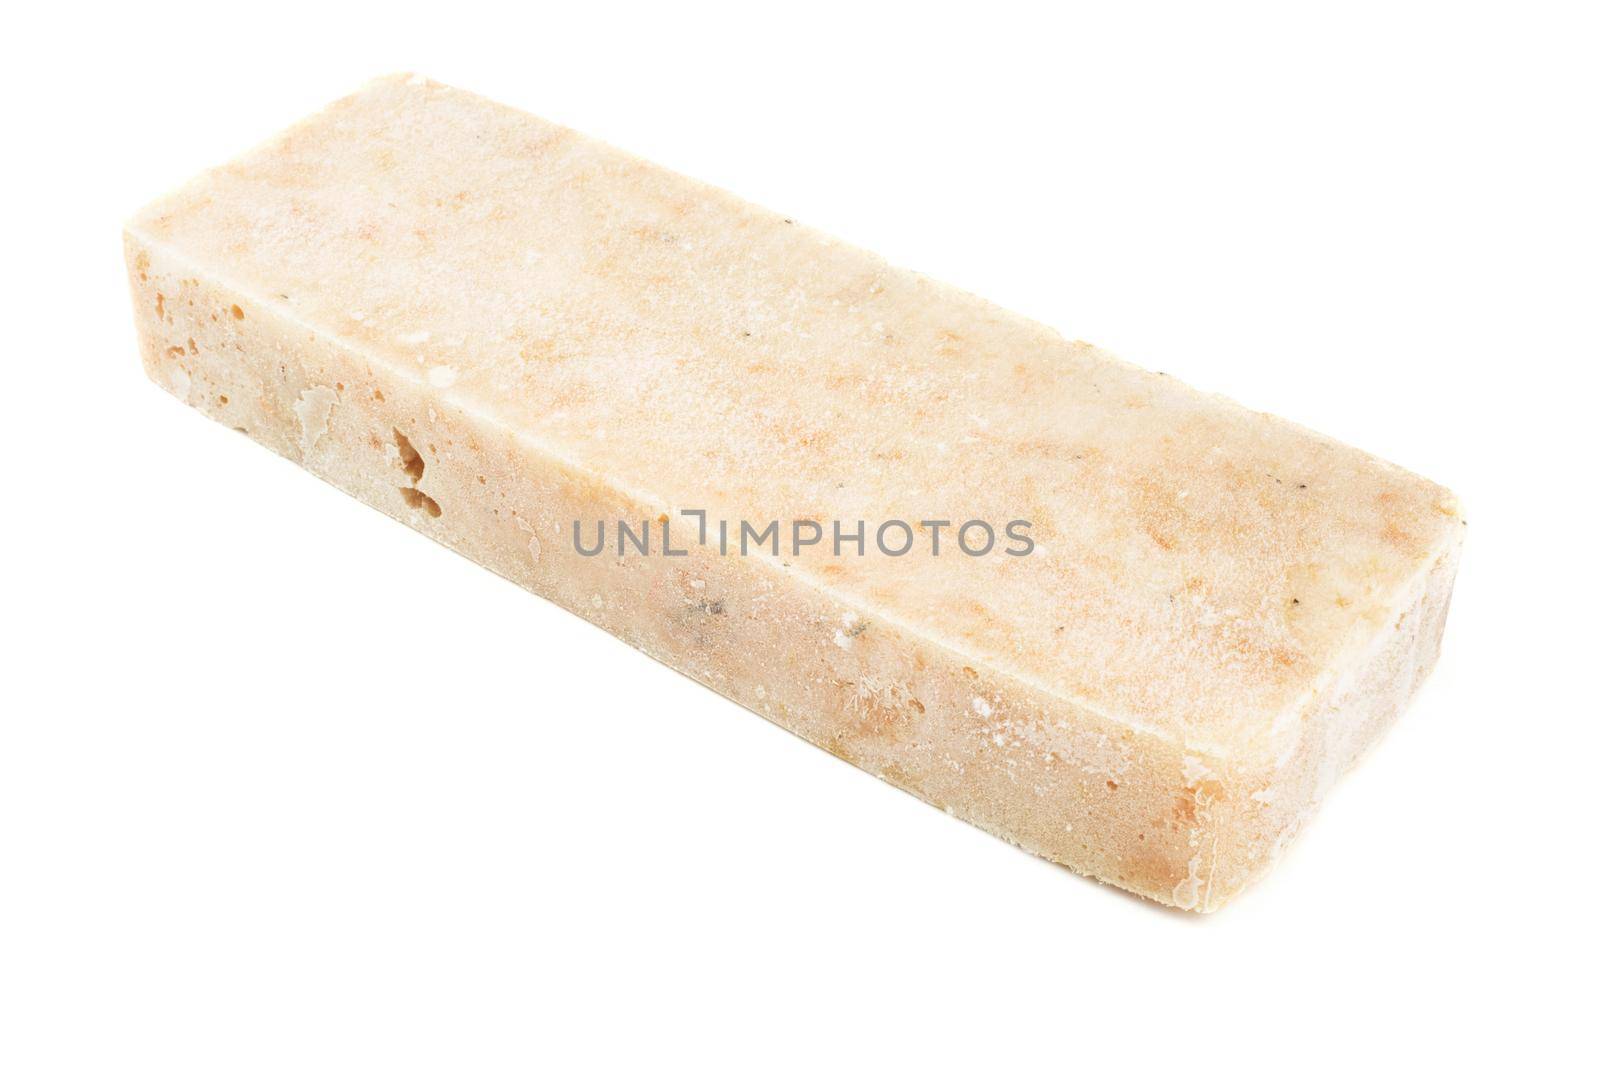 Frozen minced cod fish block isolated on white background, semifinished prepack